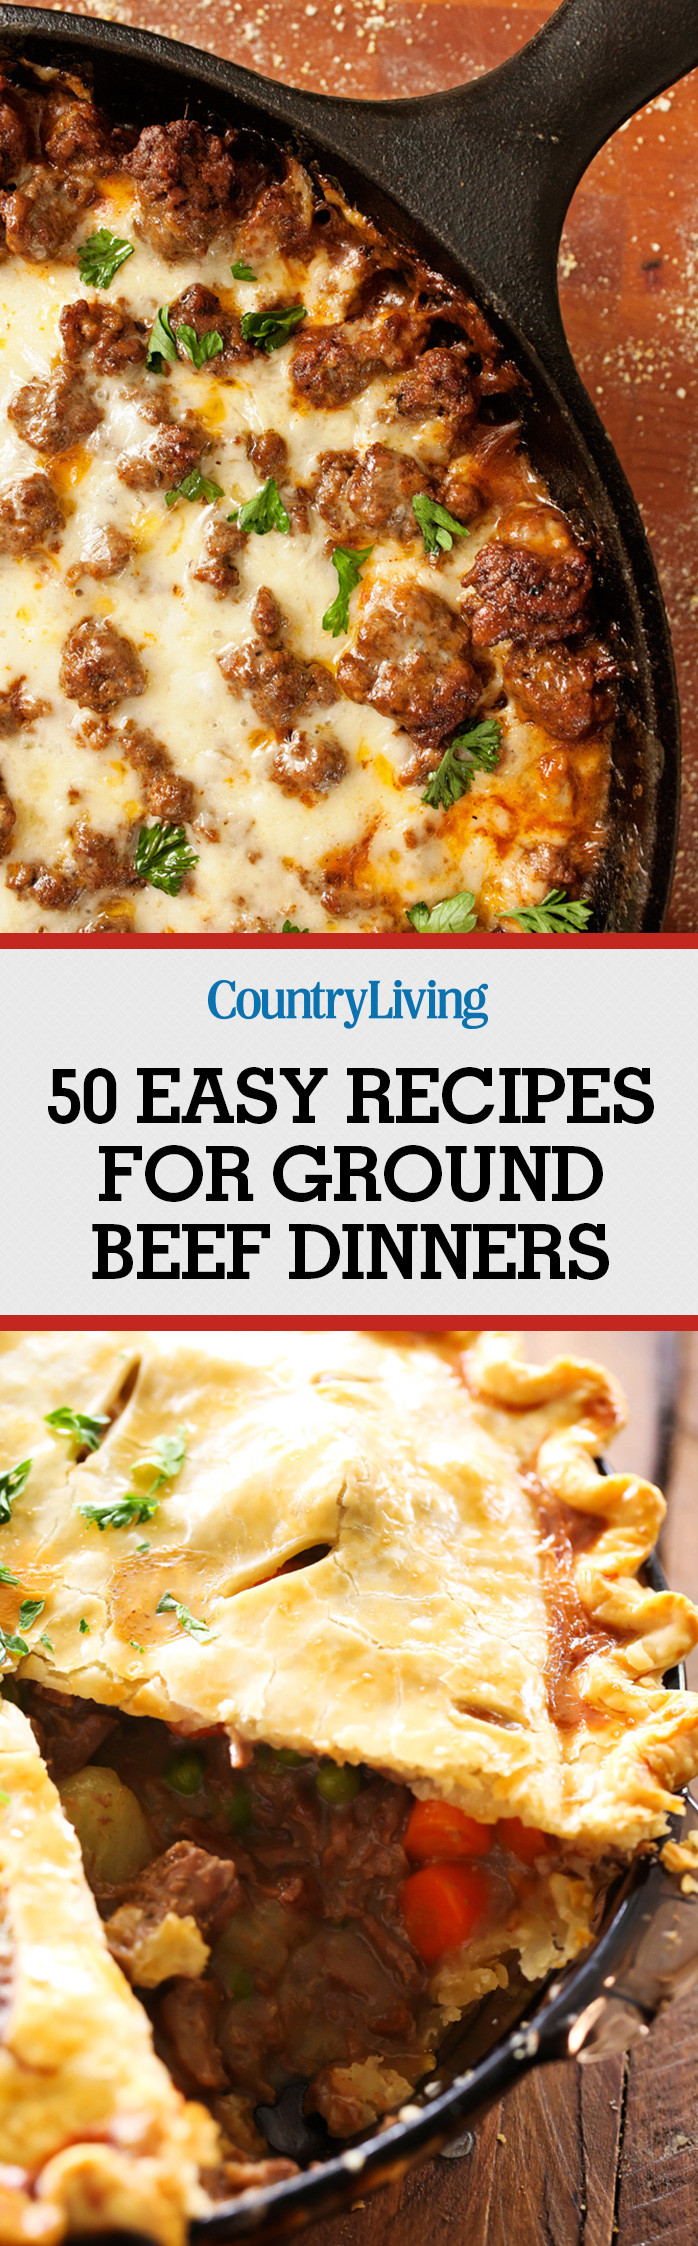 Simple Meals With Ground Beef
 50 Best Ground Beef Recipes Dinner Ideas With Ground Beef